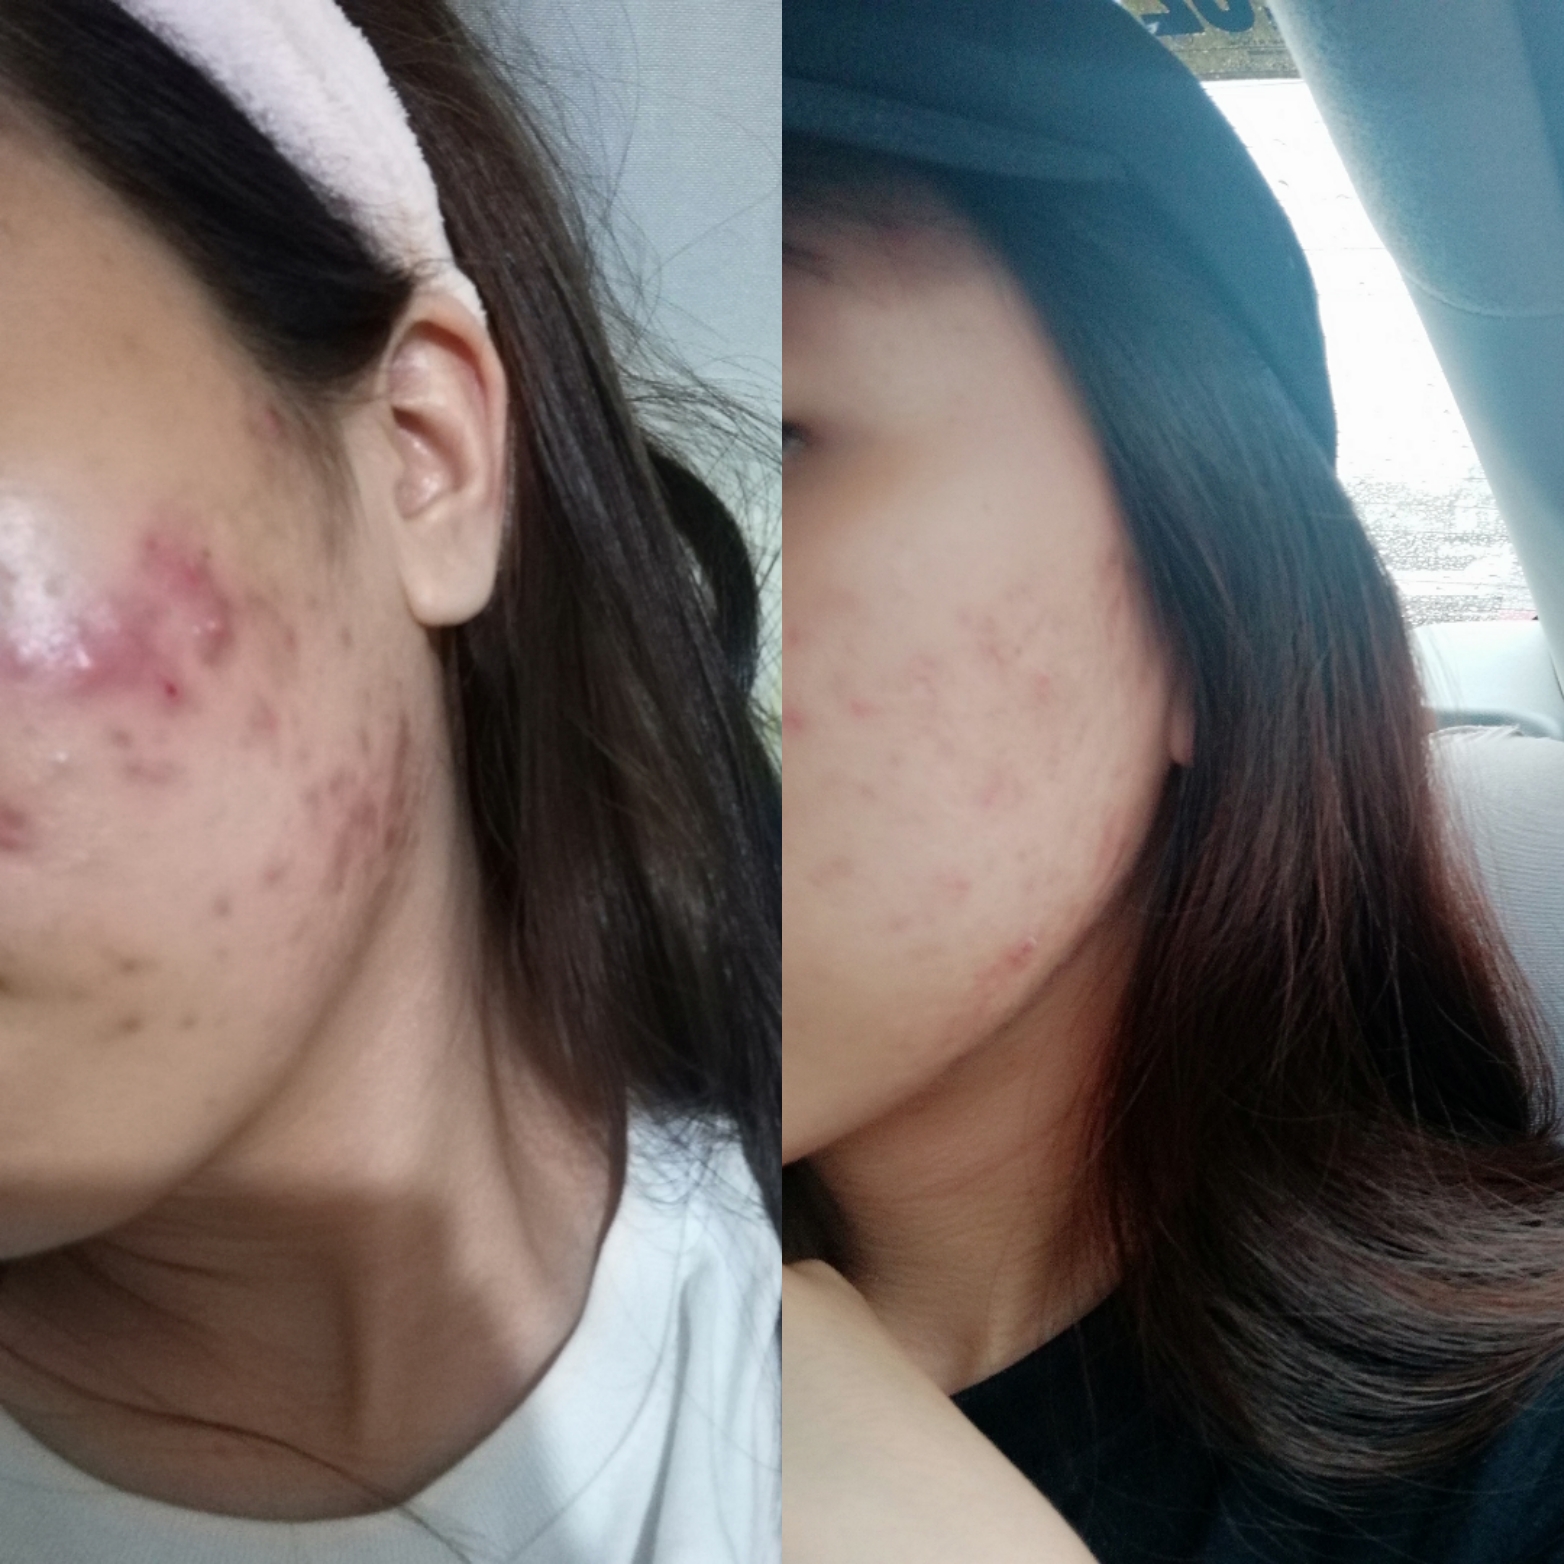 How I cured my acne and acne scars through Korean Skincare – Annyeong